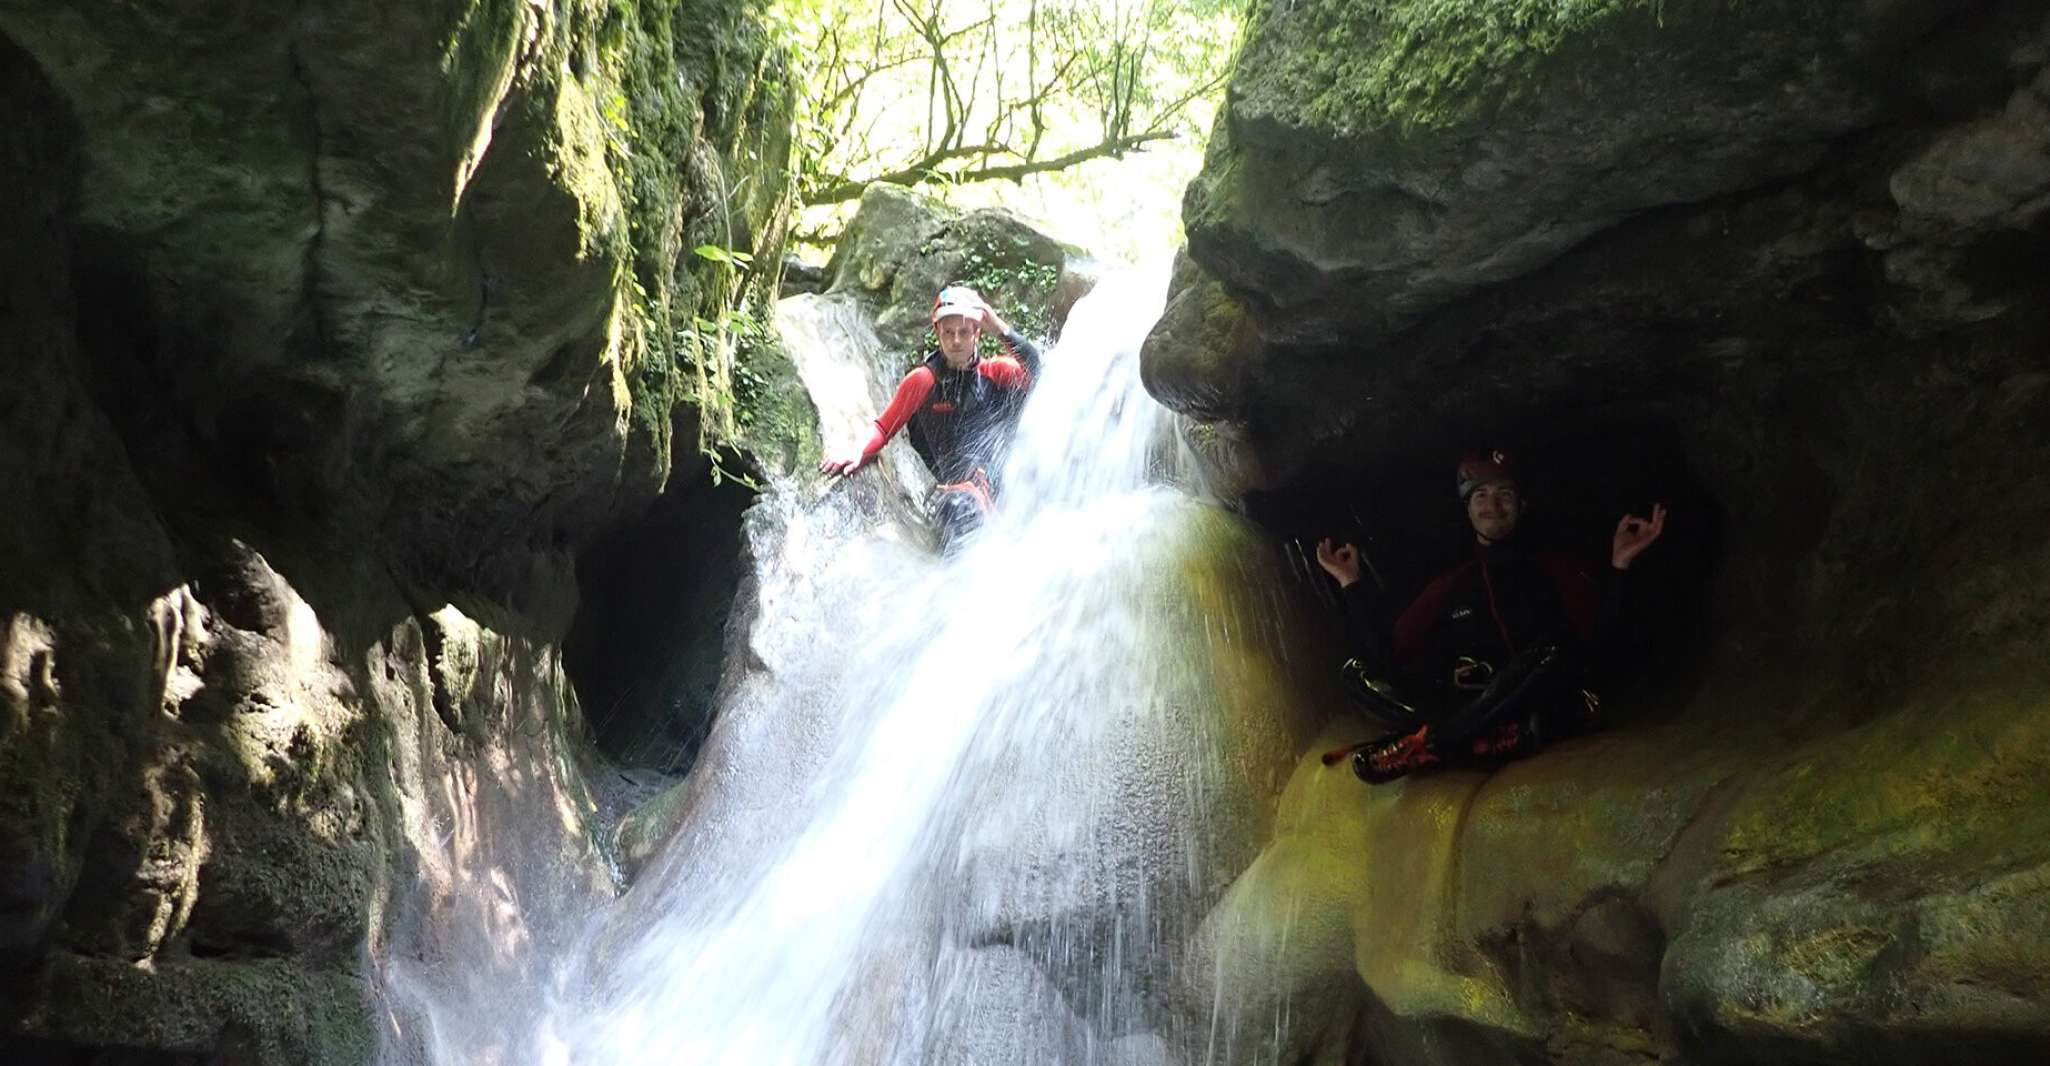 Grenoble, Discover canyoning in the Vercors. - Housity